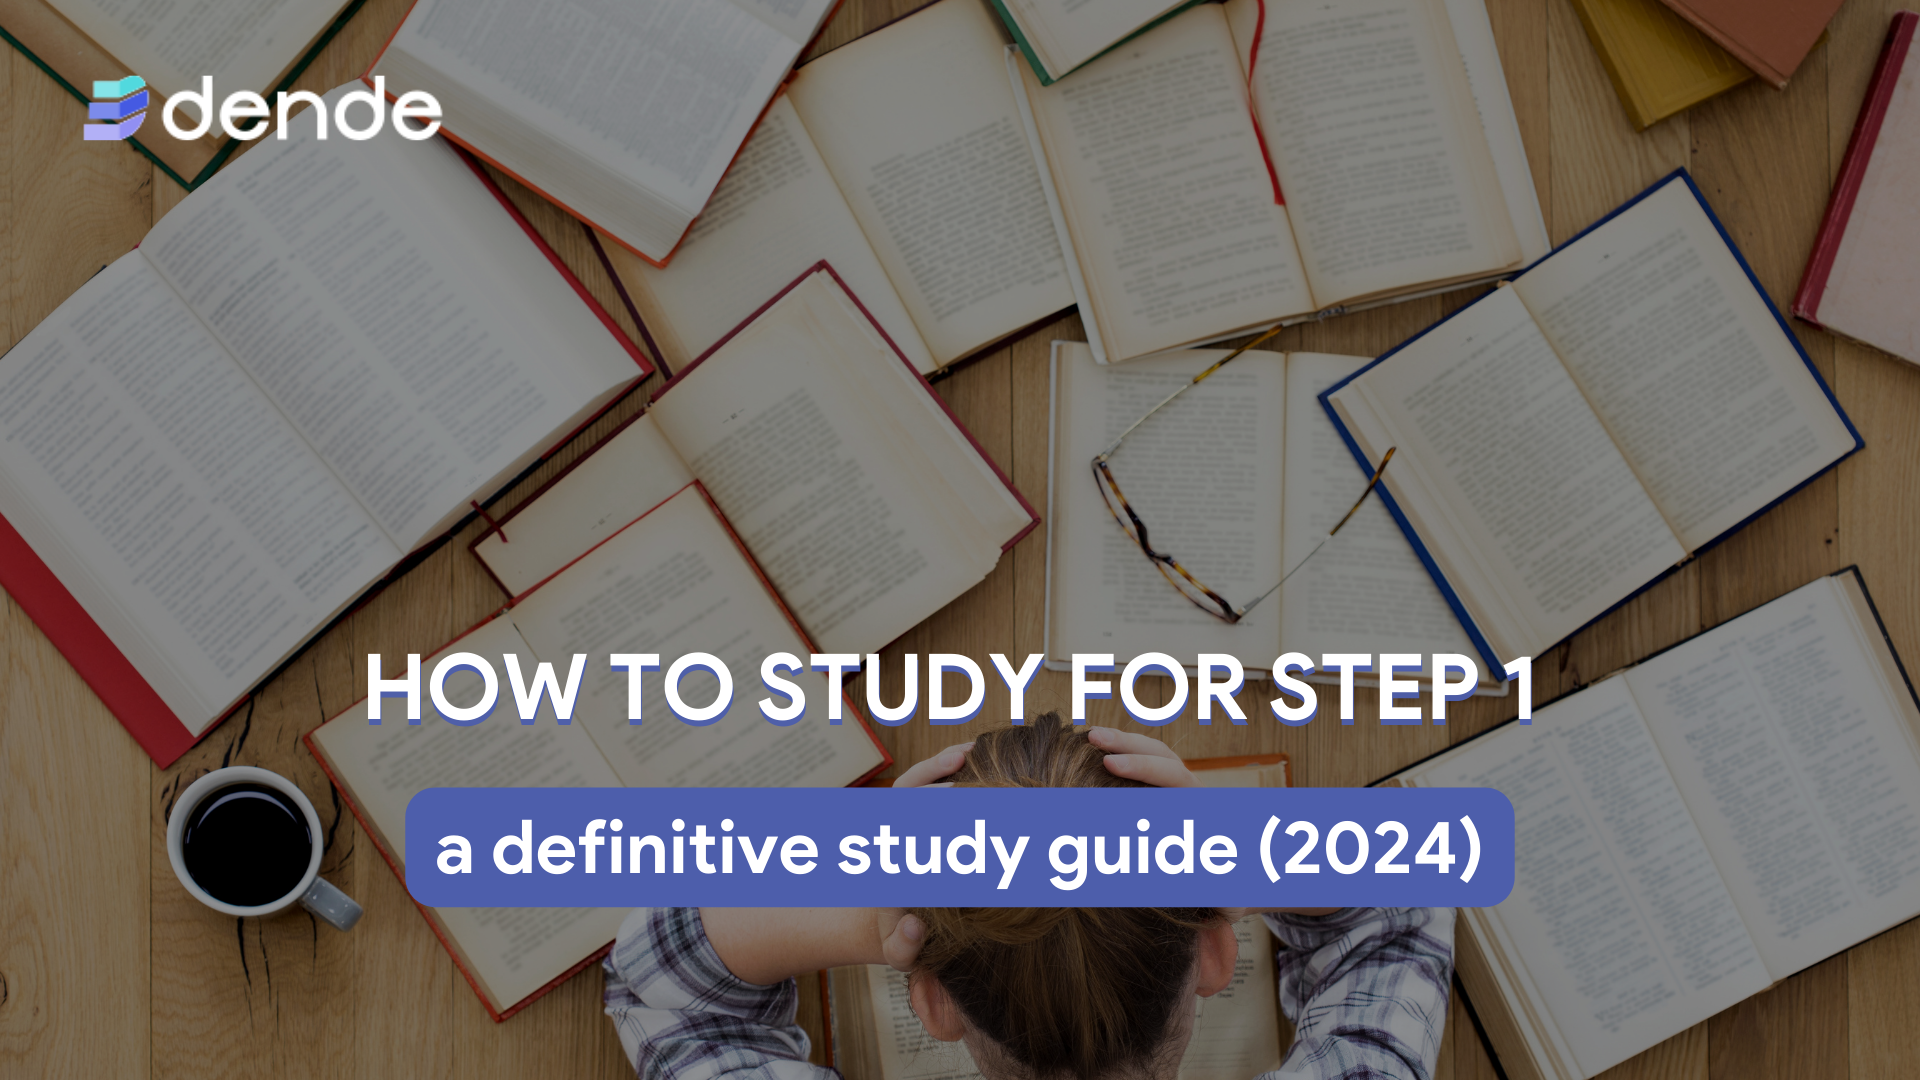 How to study for Step 1: a definitive study guide (2024)